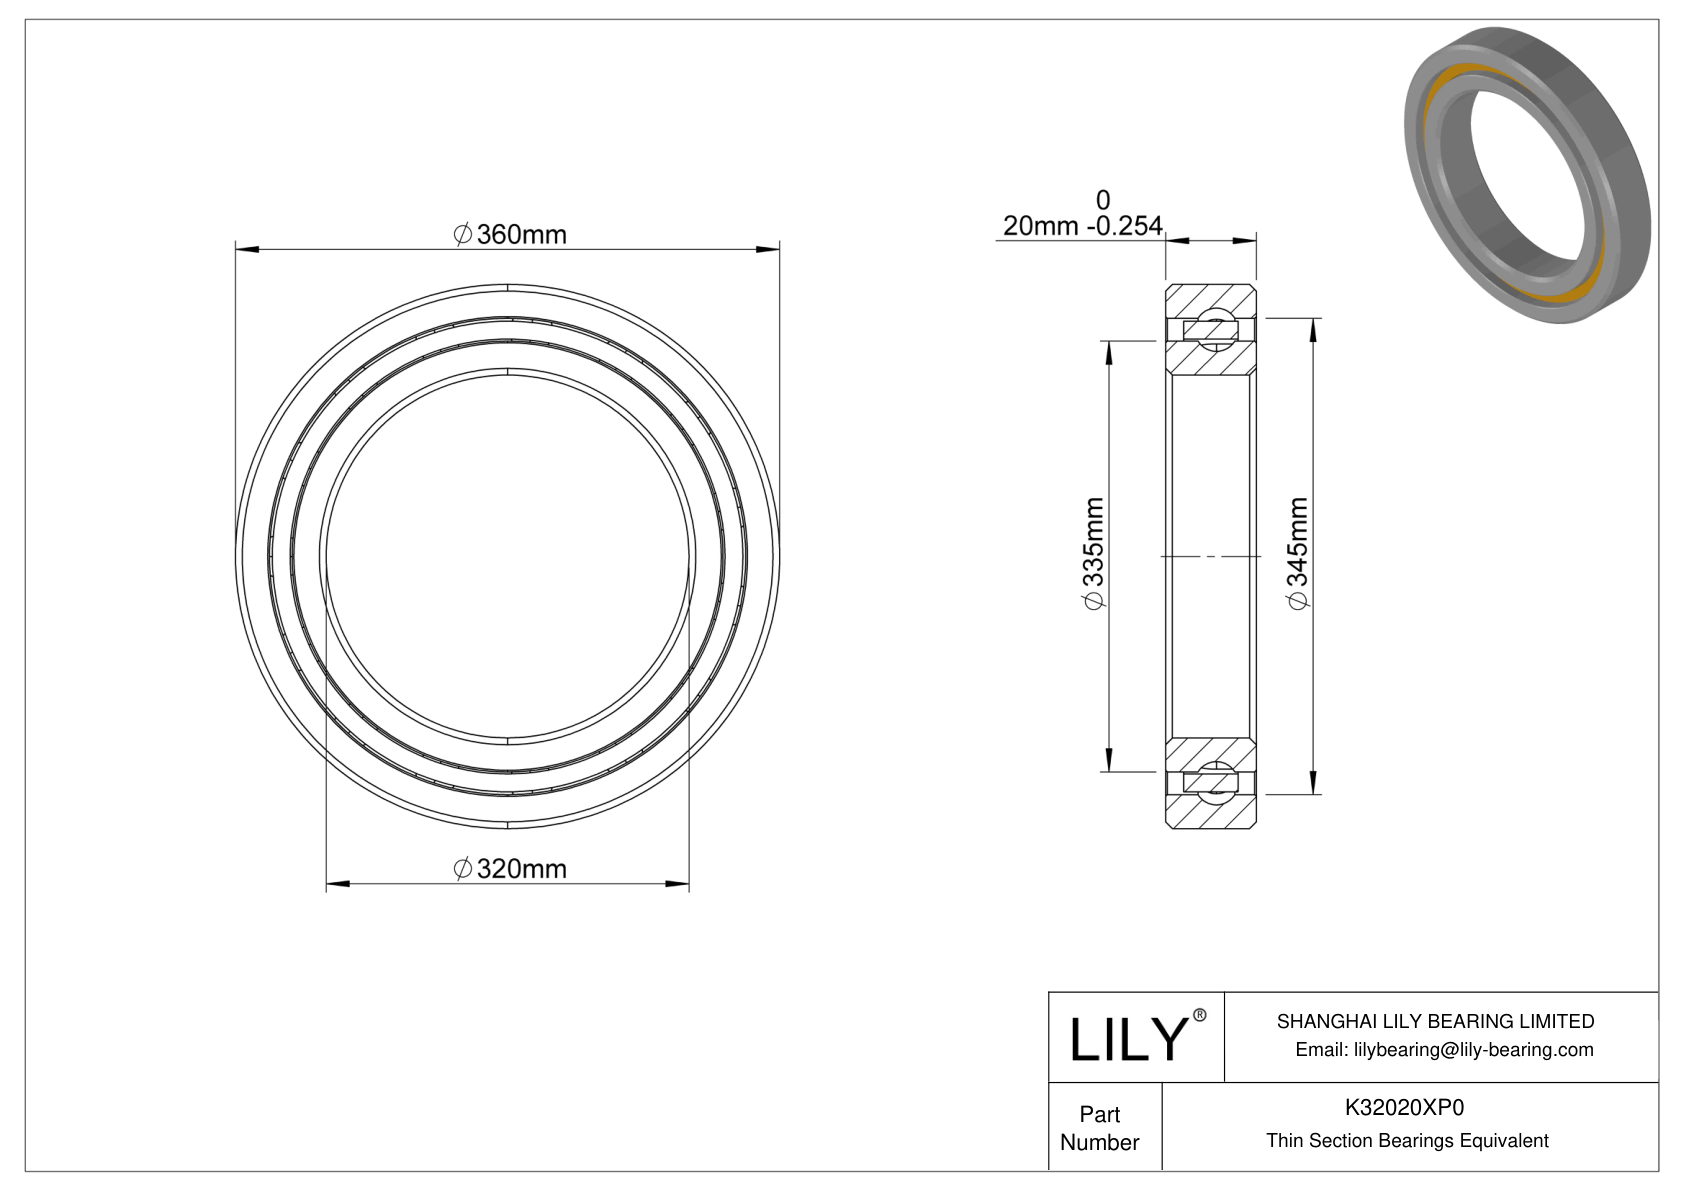 K32020XP0 Constant Section (CS) Bearings cad drawing